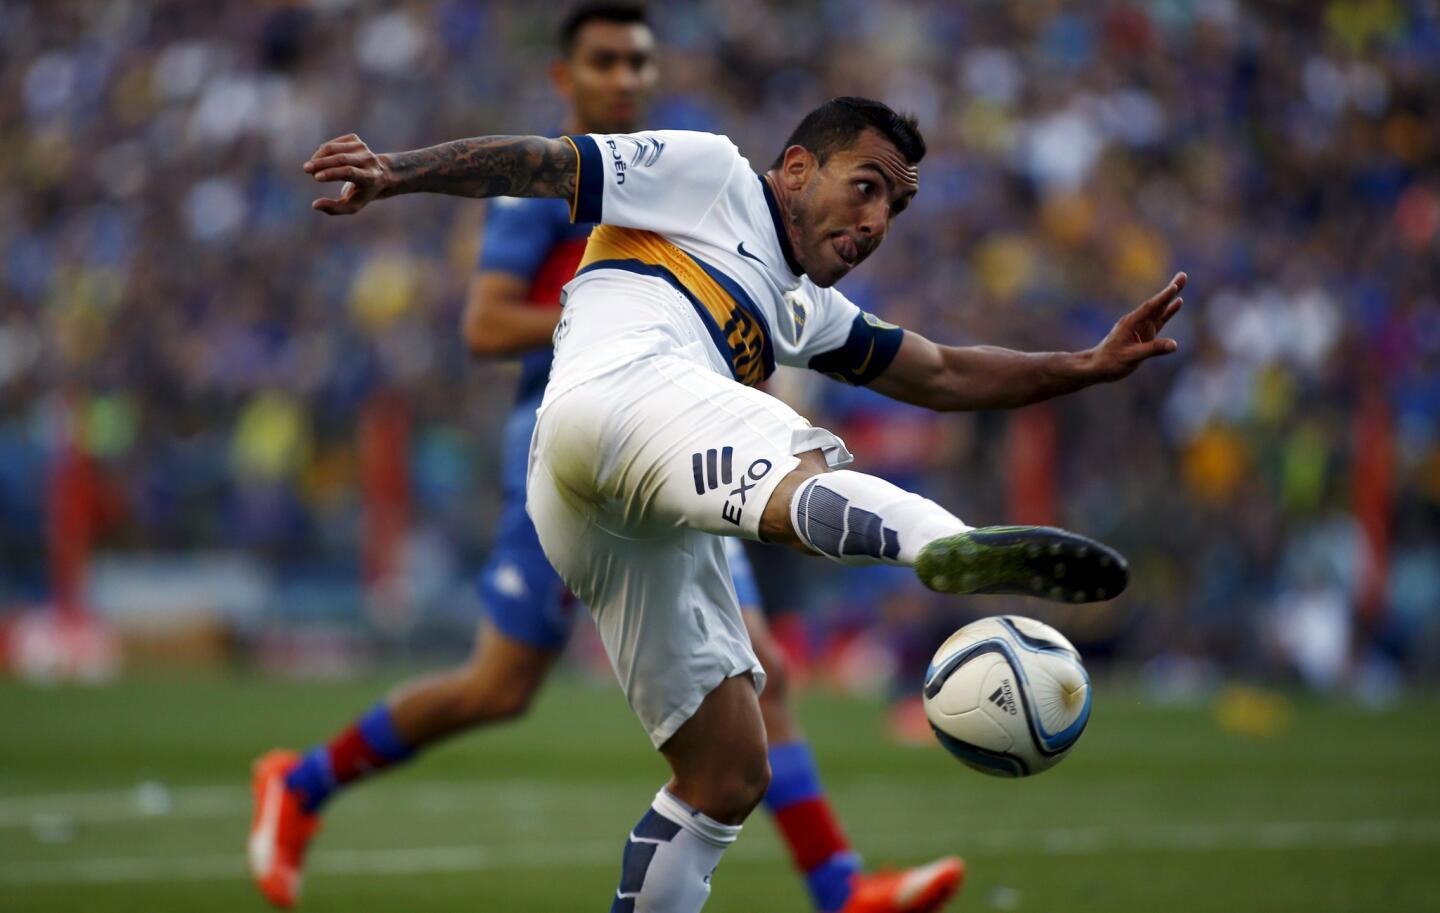 Tevez tries to kick the ball during their Argentine First Division soccer match against Tigre in Buenos Aires